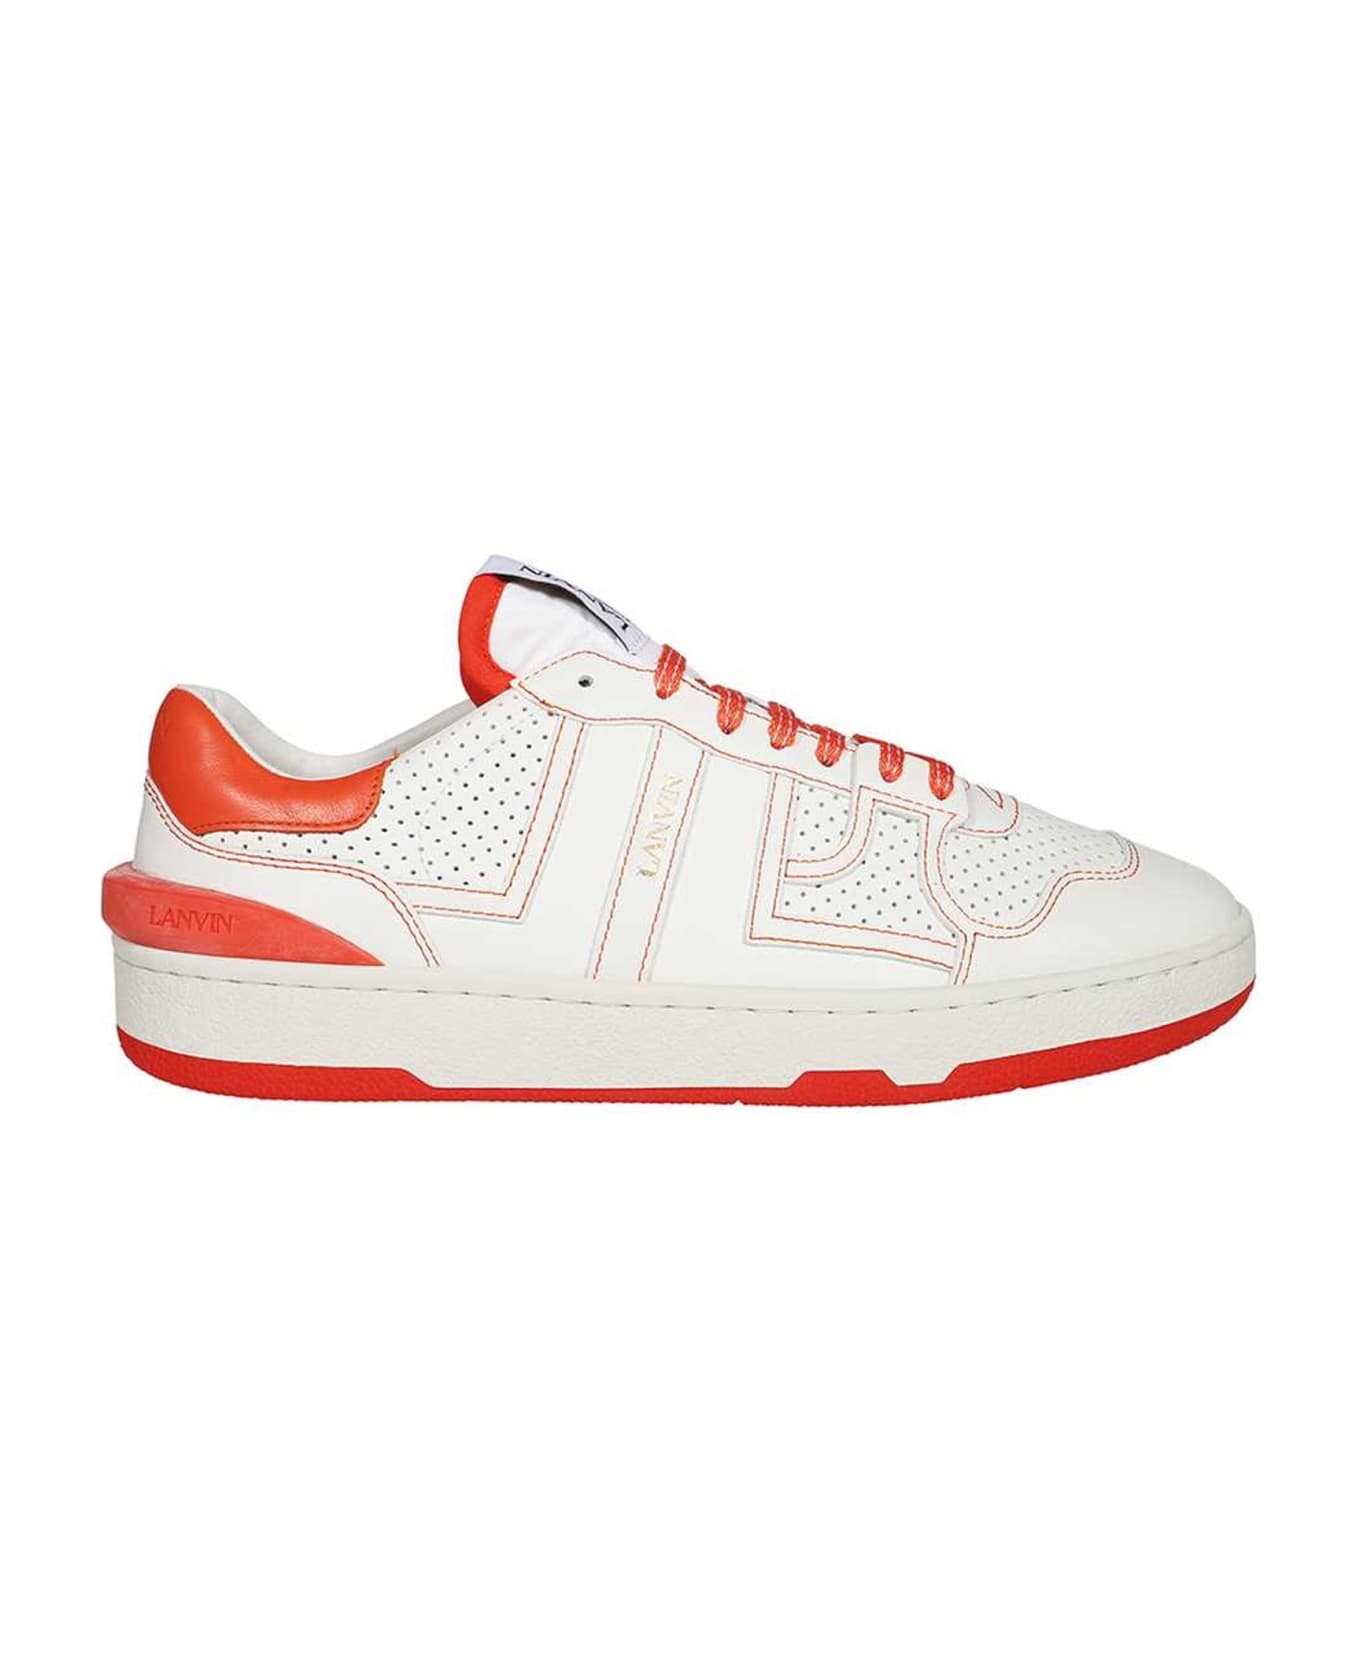 Lanvin Clay Low-top Sneakers - White